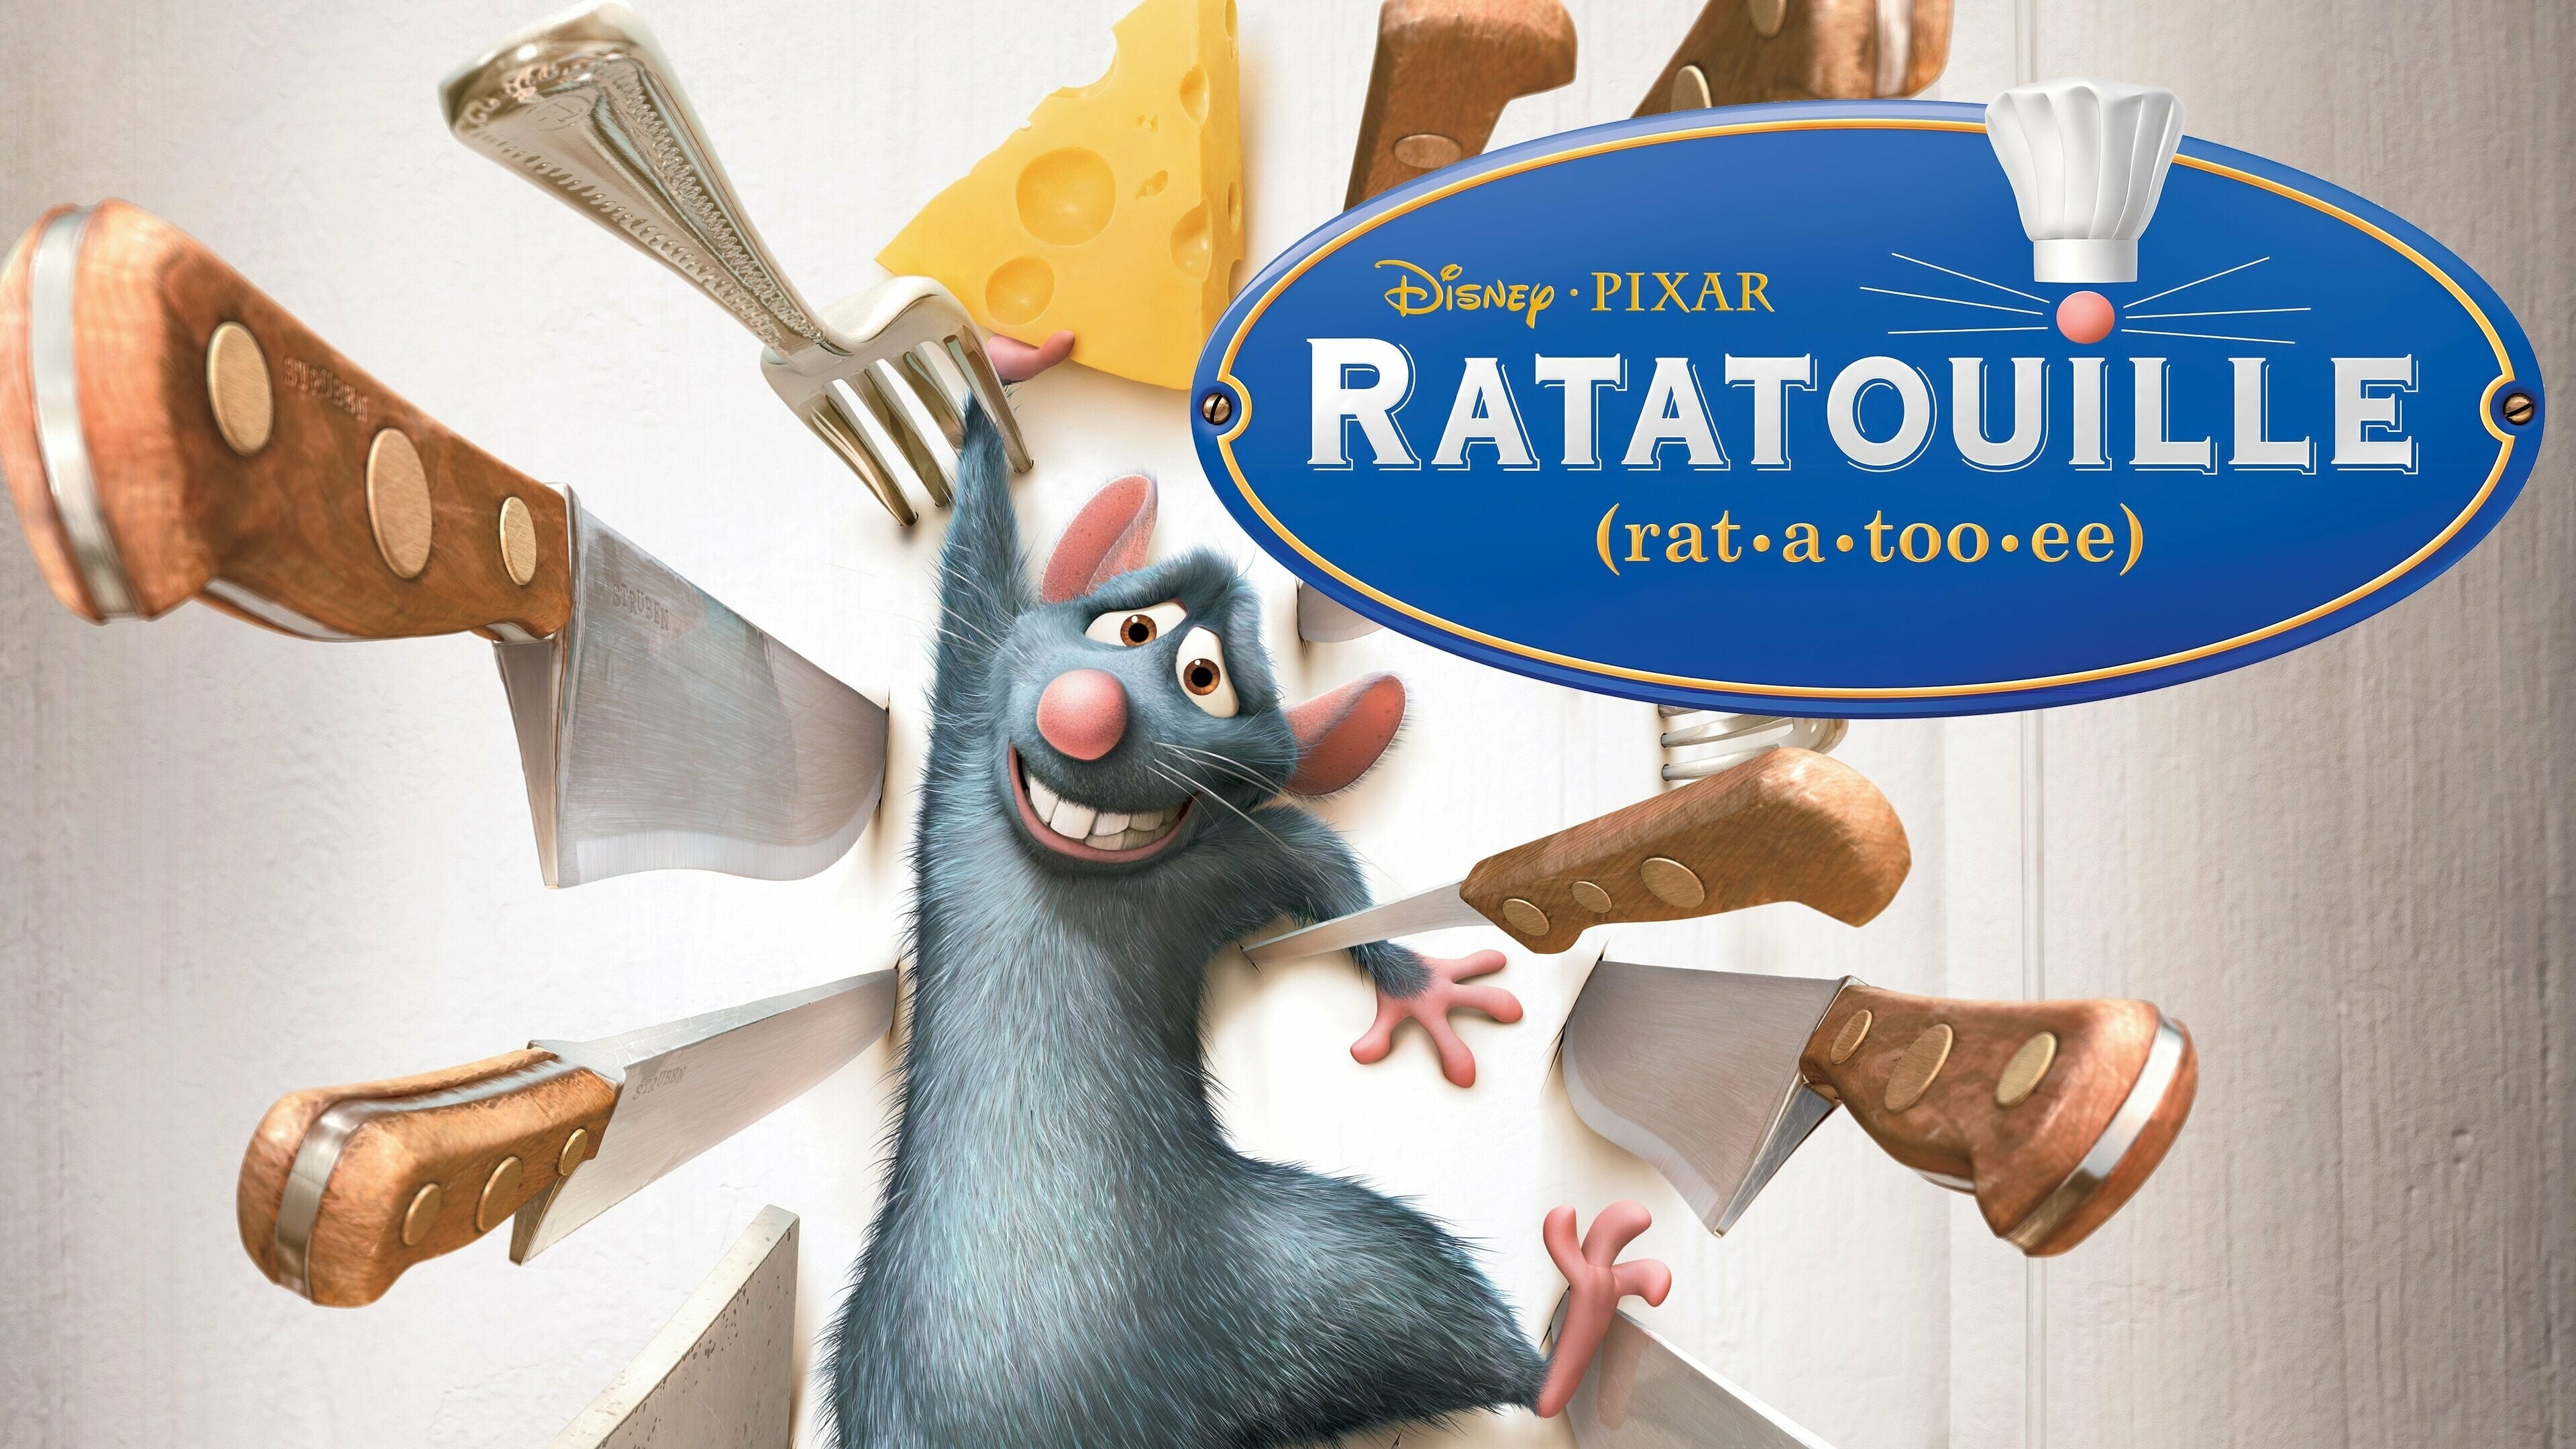 Ratatouille: A rat who can cook makes an unusual alliance with a young kitchen worker. 3840x2160 4K Wallpaper.